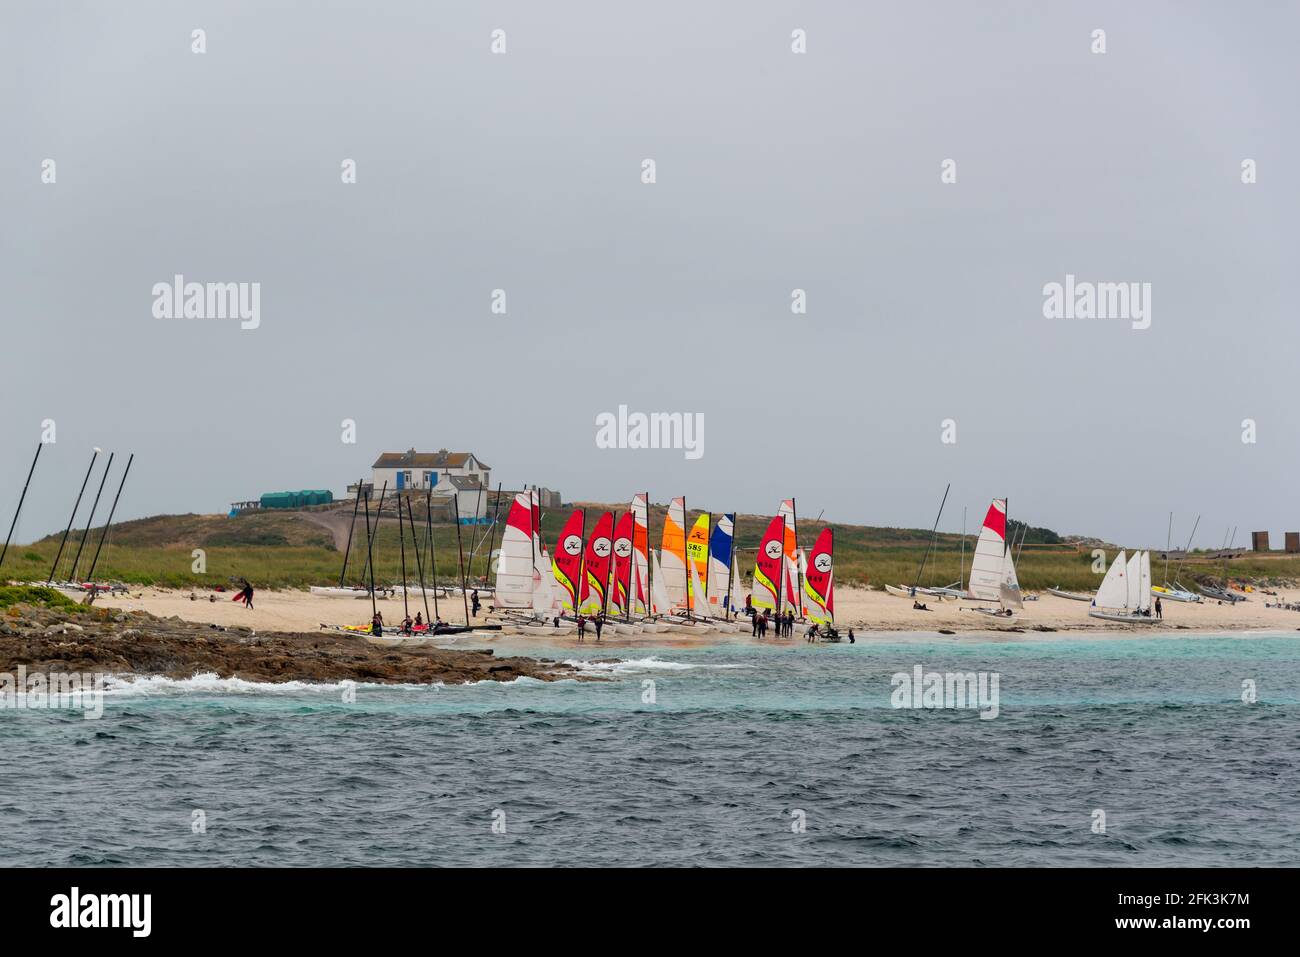 Les Glenans sailing school on the Glenan islands, Brittany, France Stock Photo